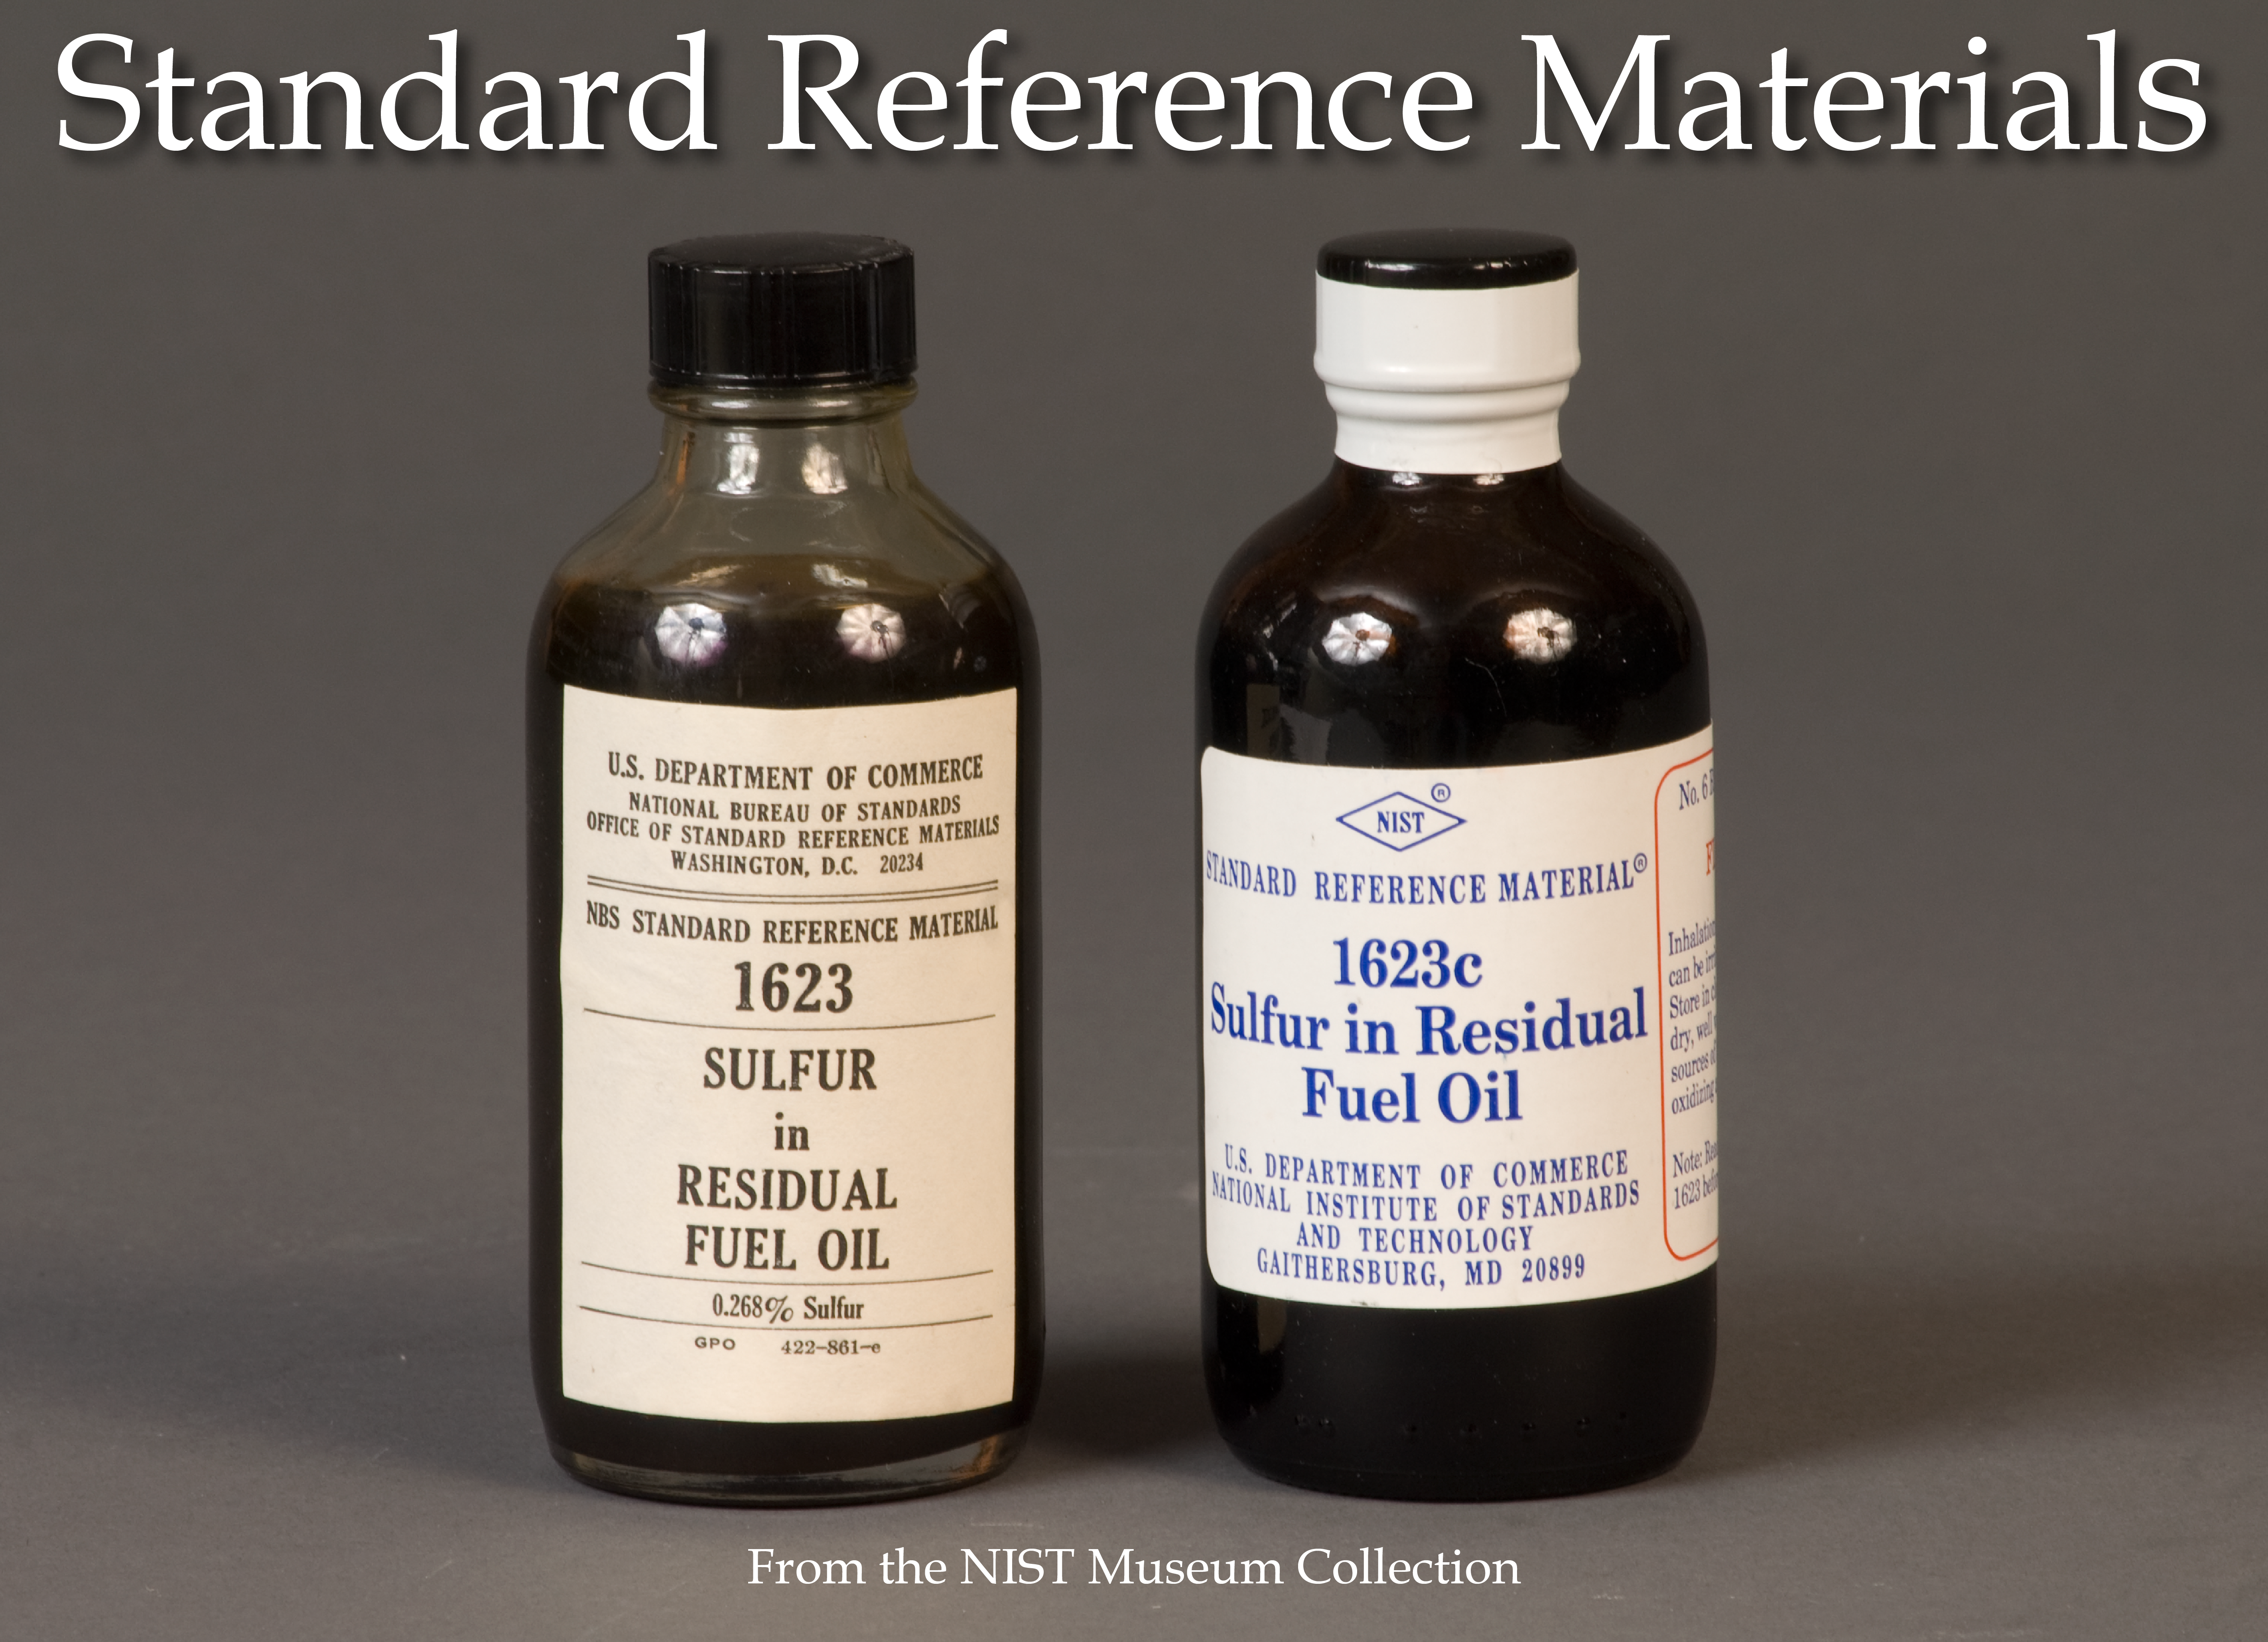 Standard Reference Materials Exhibit